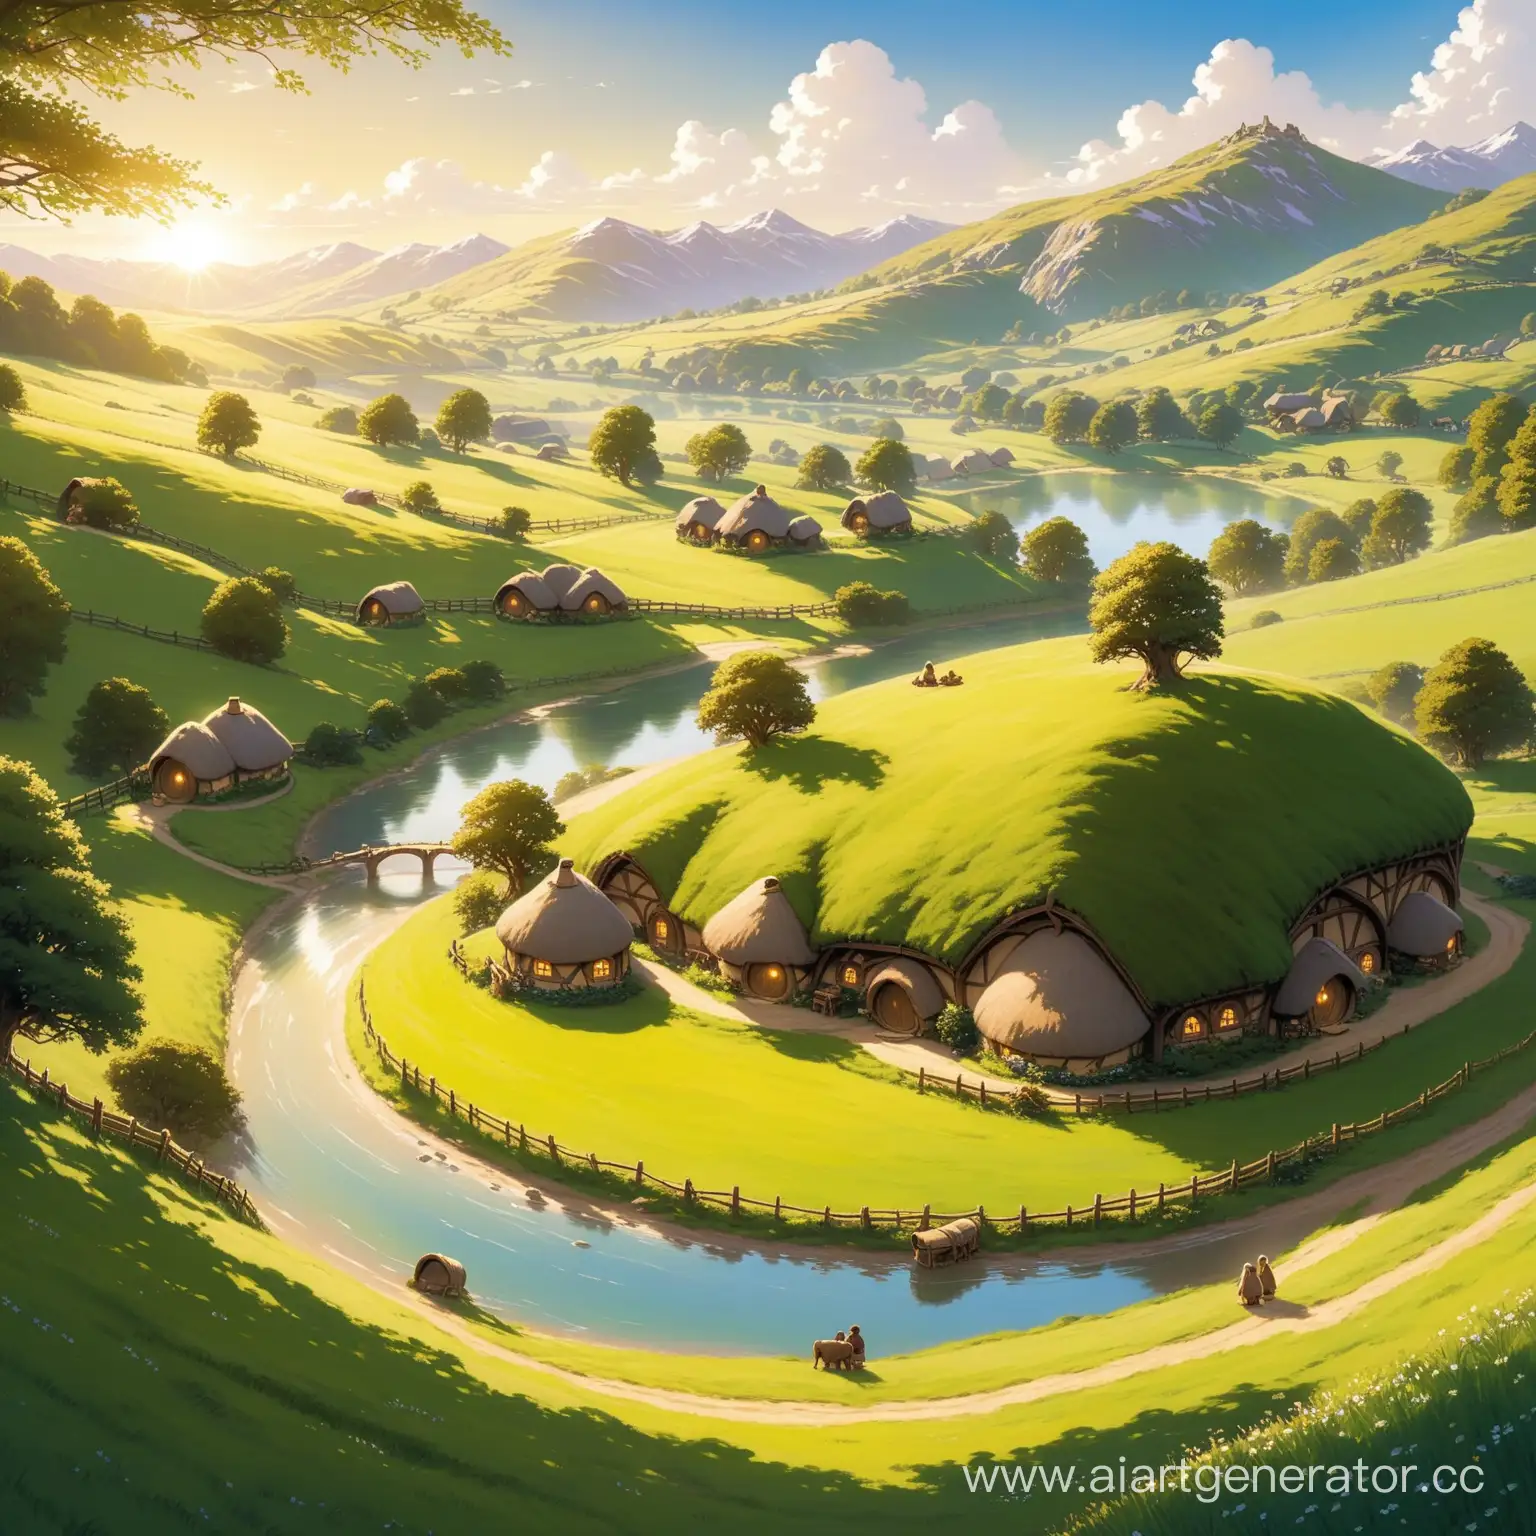 a peacfull landscape of a sunny Shire from Lord of the rings with hobbits doing their daily routines